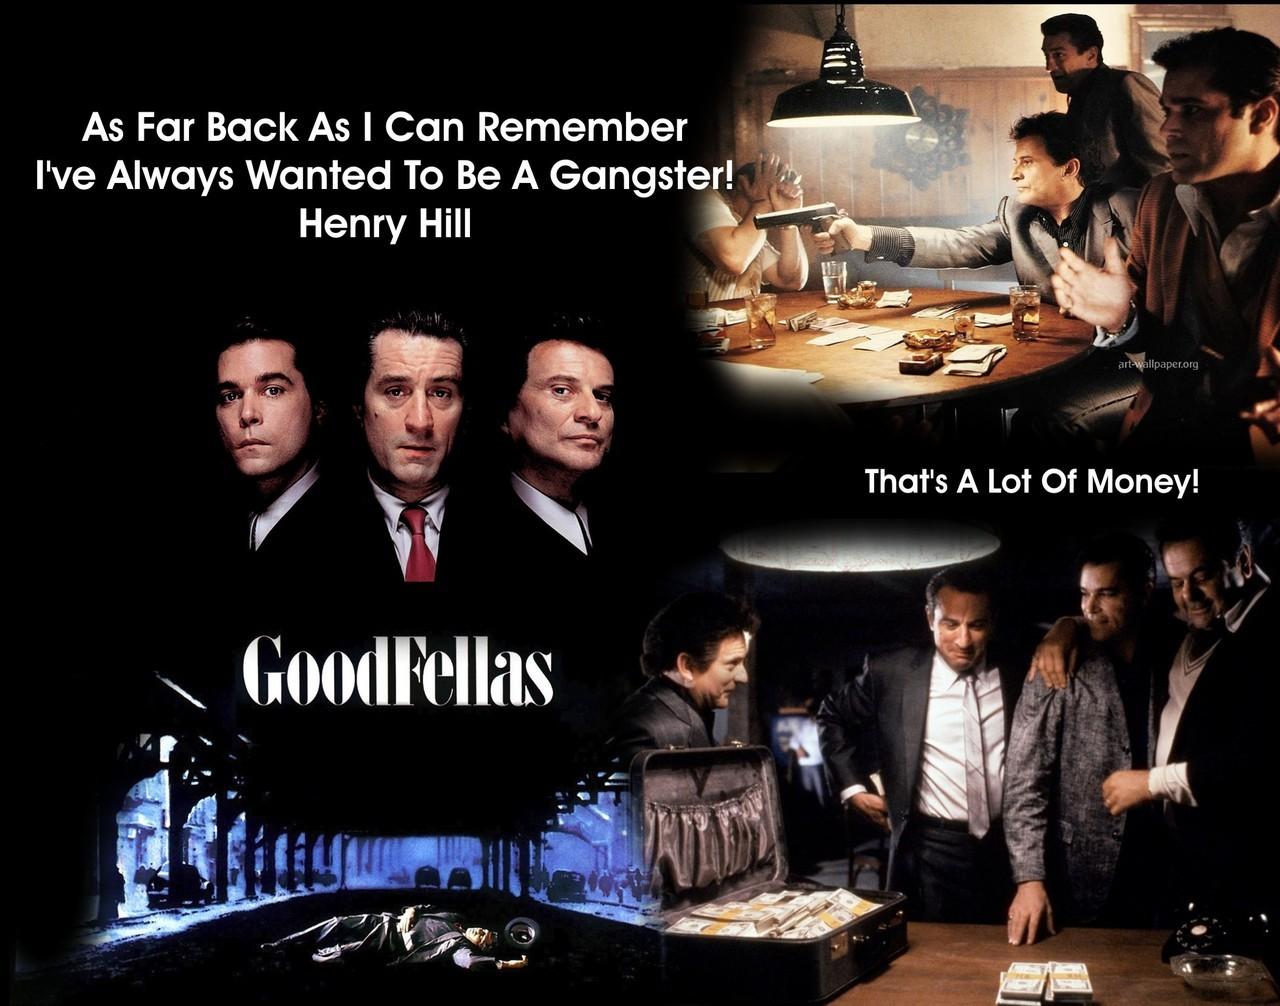 Famous Quote Poster Goodfellas As Far Back As I Can Remember I've